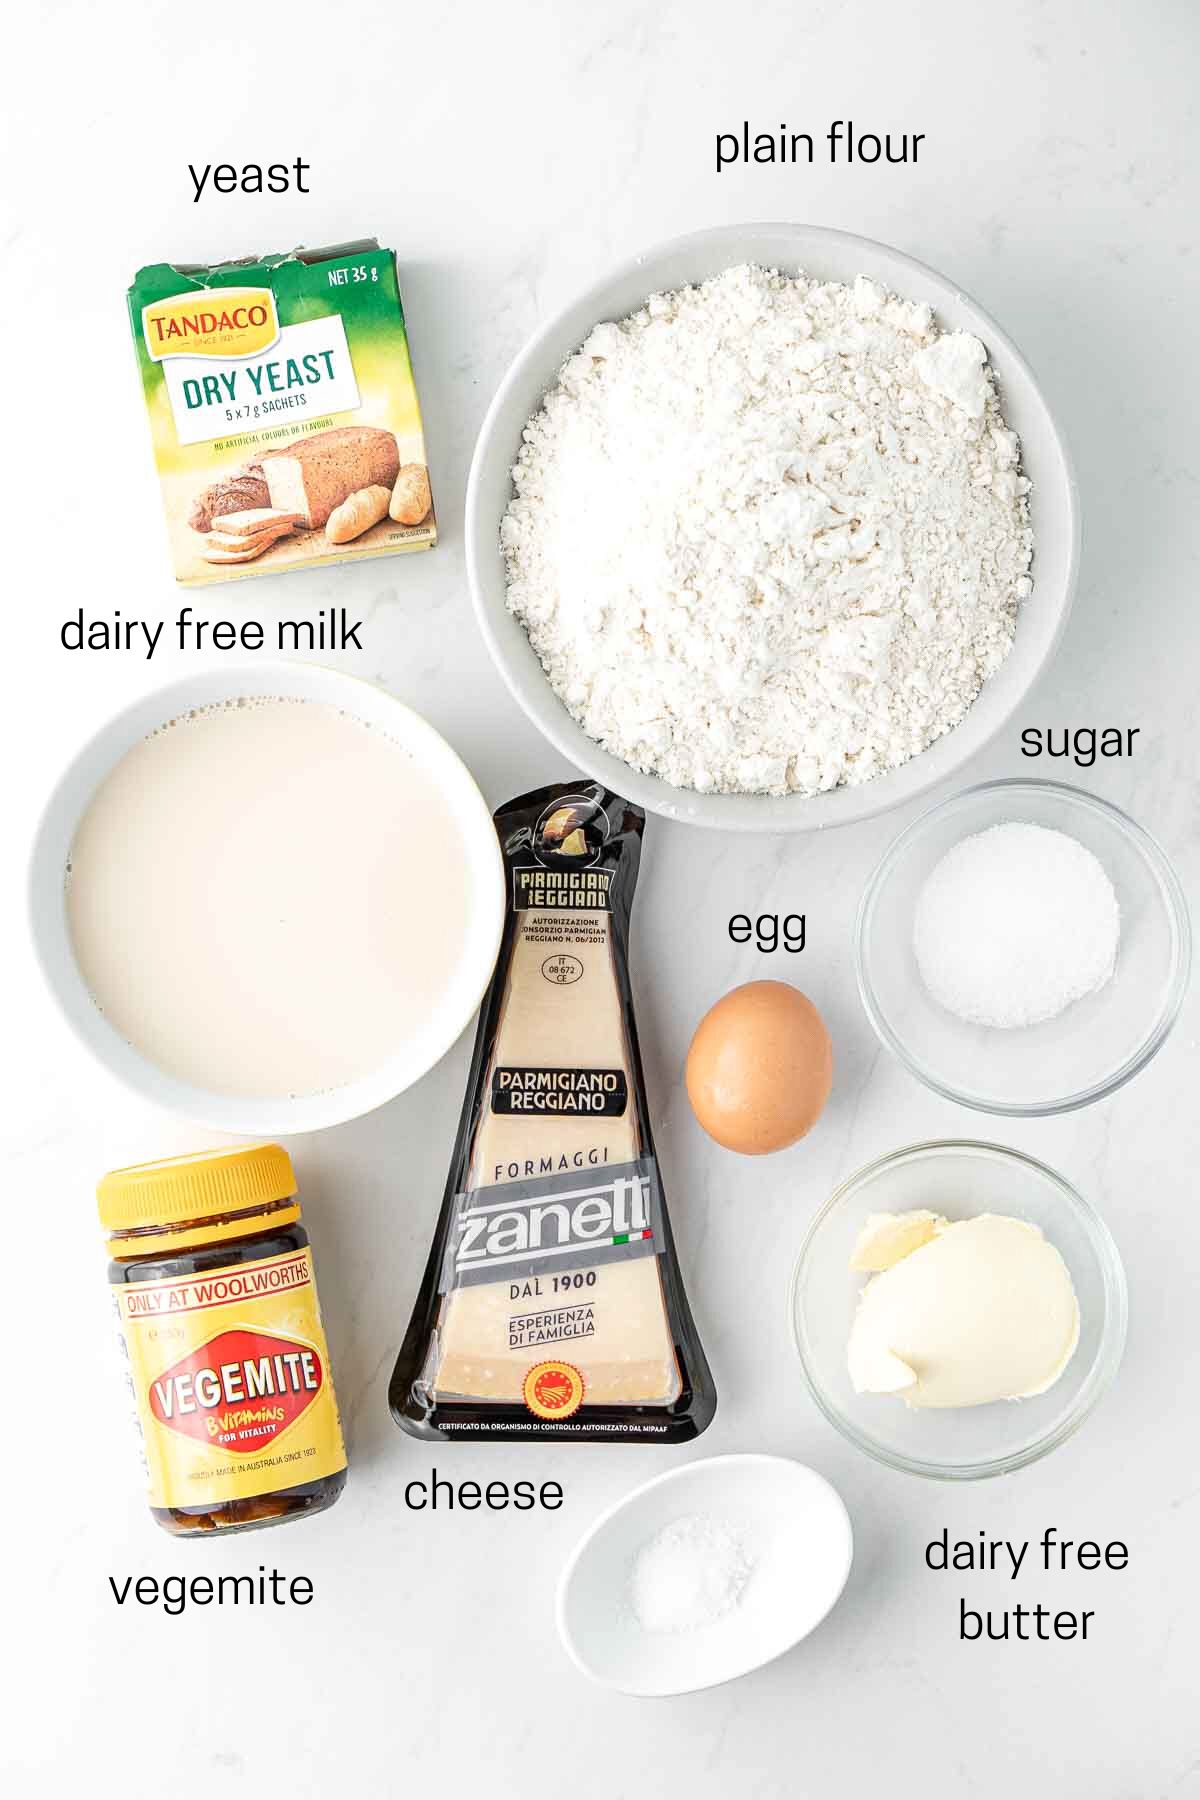 All ingredients needed for vegemite and cheese hot cross buns laid out in bowls.